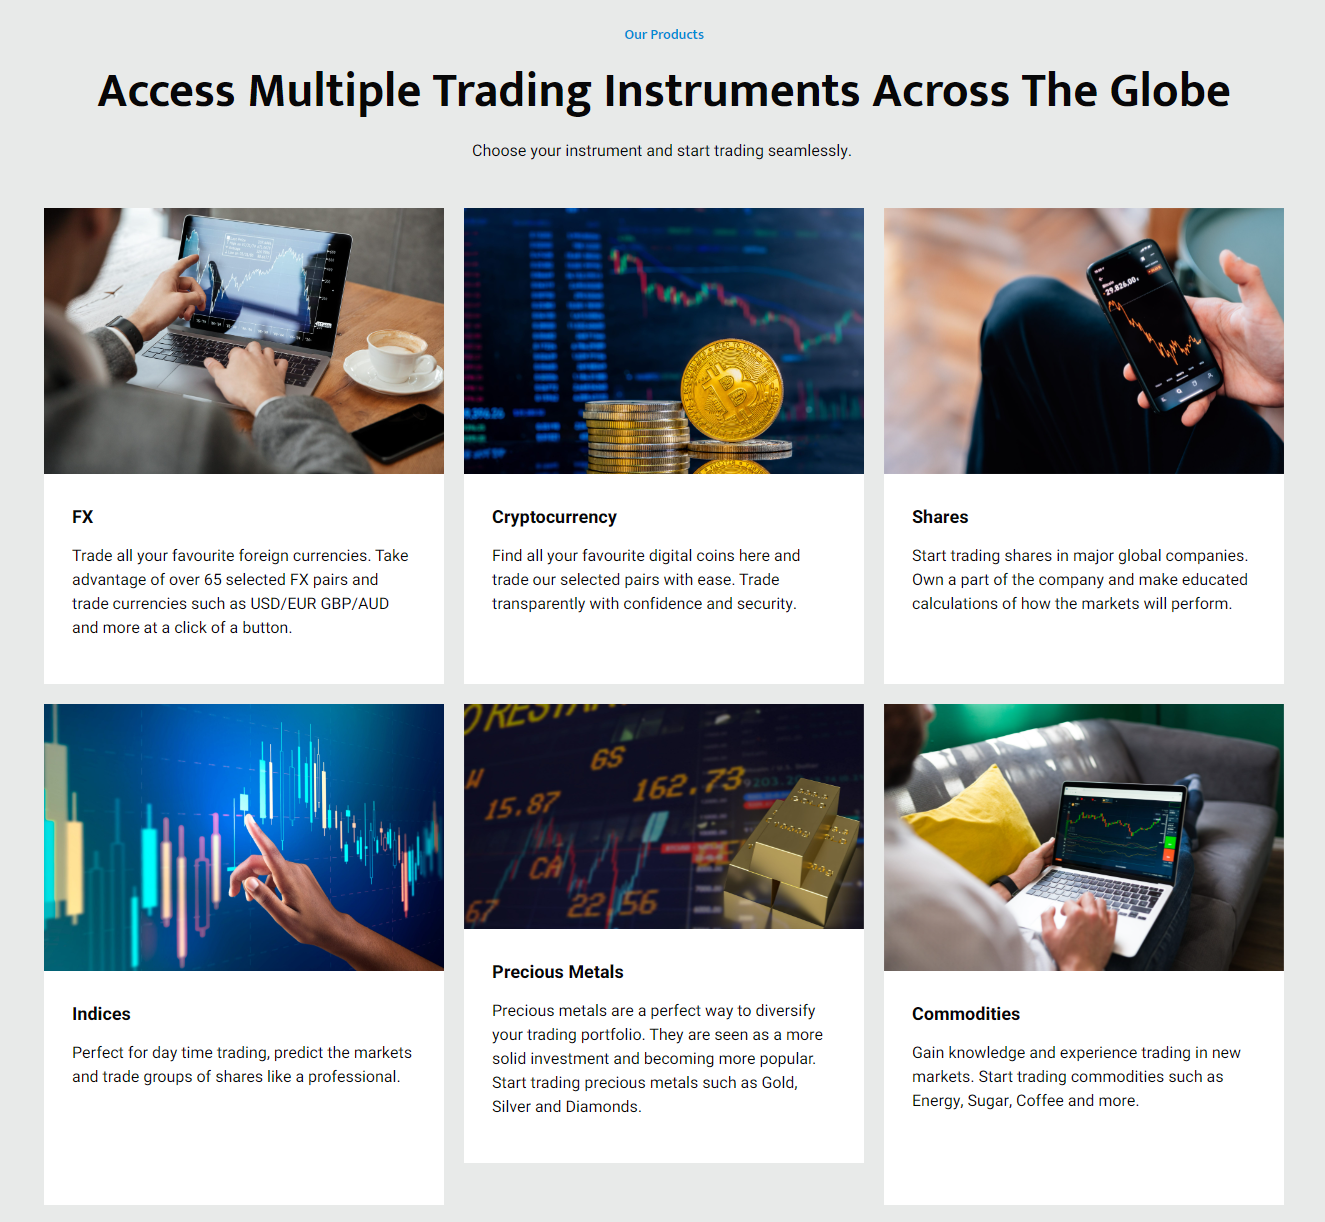 Smart Ix Shares trading products